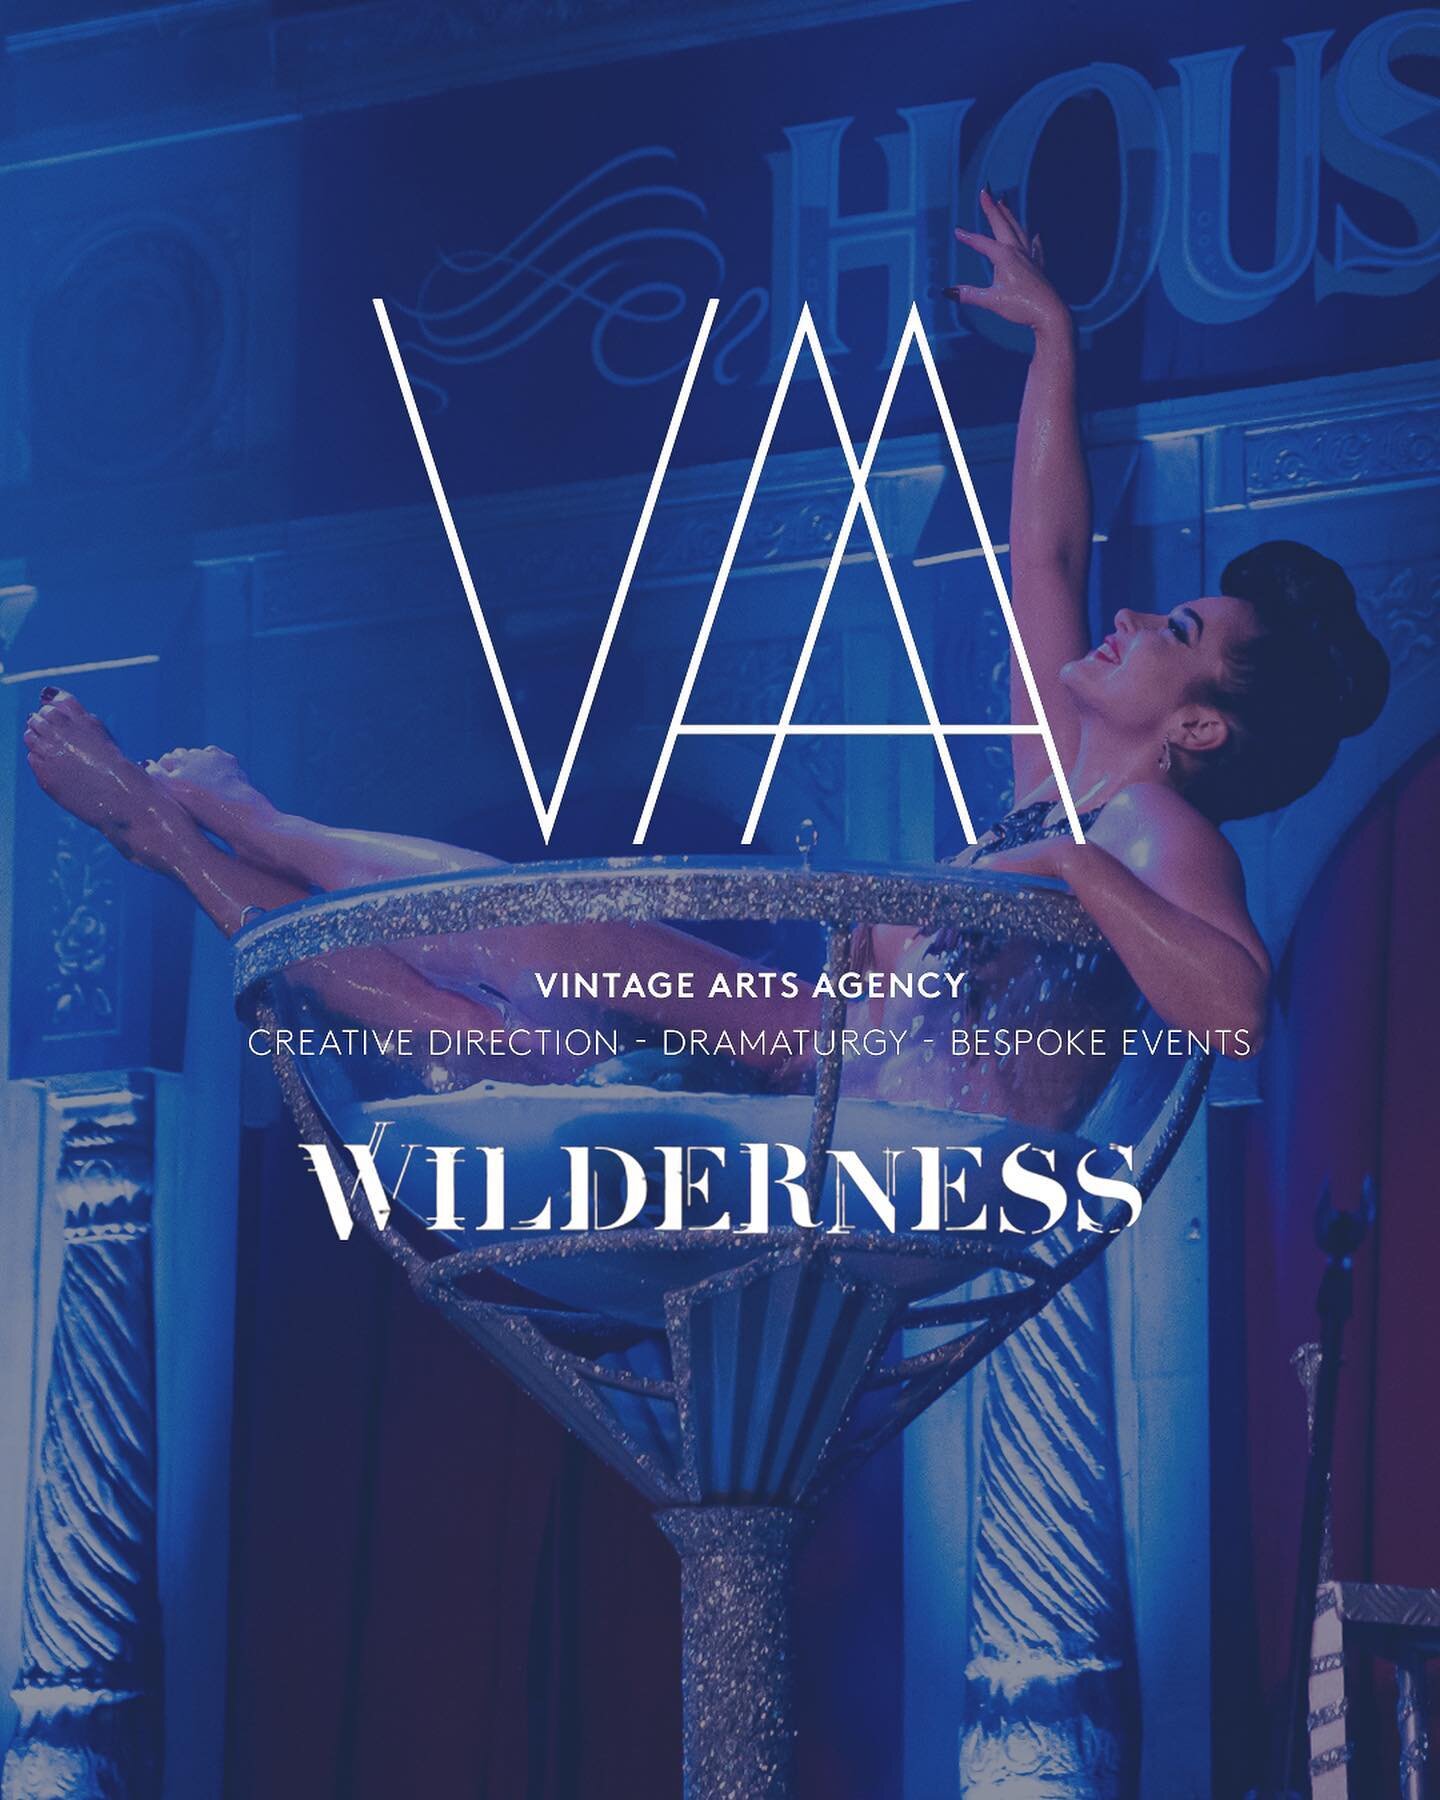 VINTAGE ARTS AGENCY x WILDERNESS 2022

As we prepare for our biggest event yet with @wildernesshq , we can&rsquo;t help but reflect fondly on previous shows in the legendary House of Sublime. 

The Haus Of Fatale cabaret and it&rsquo;s exotic creatur